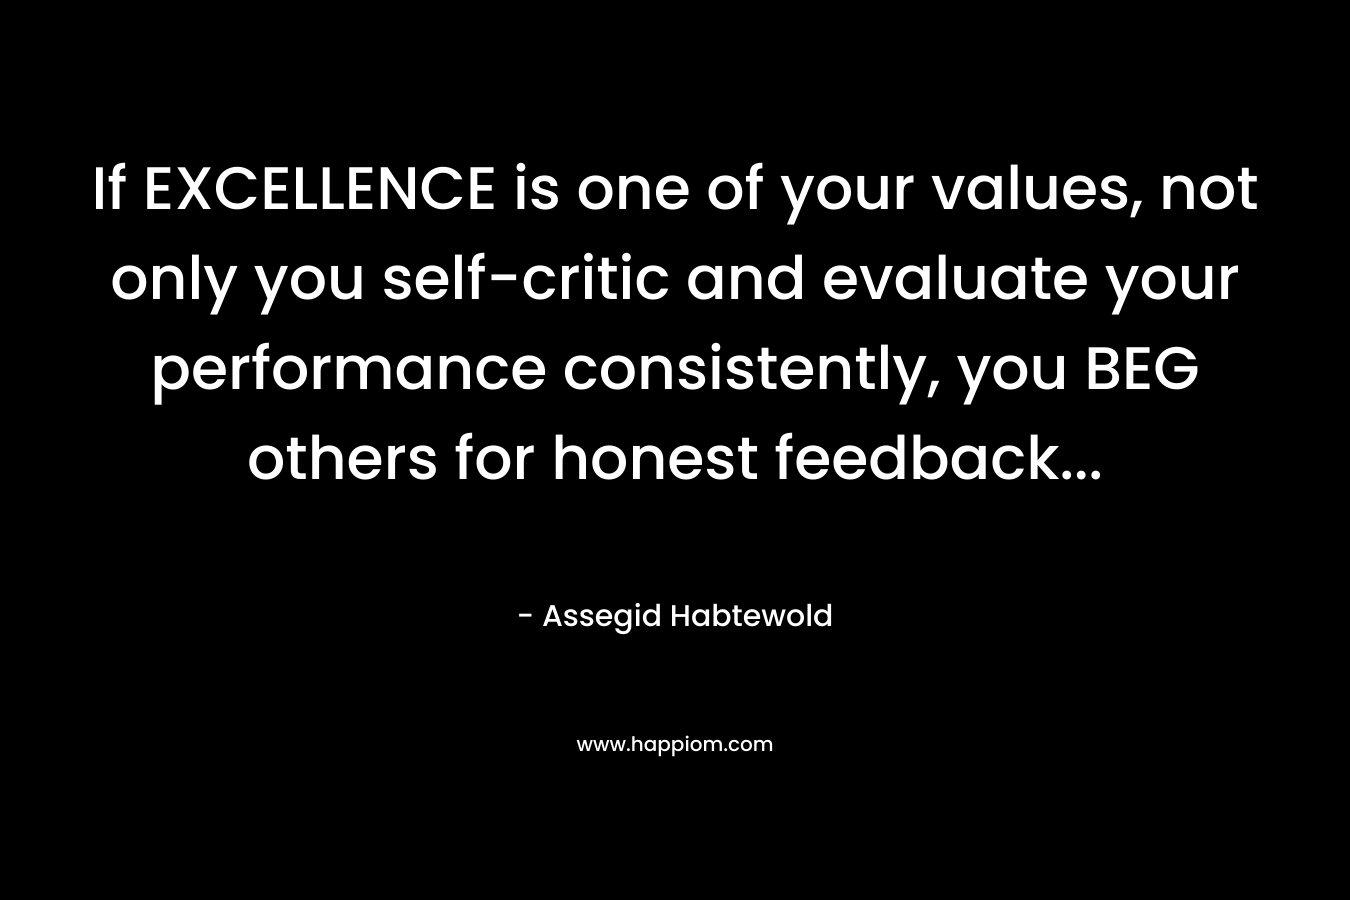 If EXCELLENCE is one of your values, not only you self-critic and evaluate your performance consistently, you BEG others for honest feedback… – Assegid Habtewold